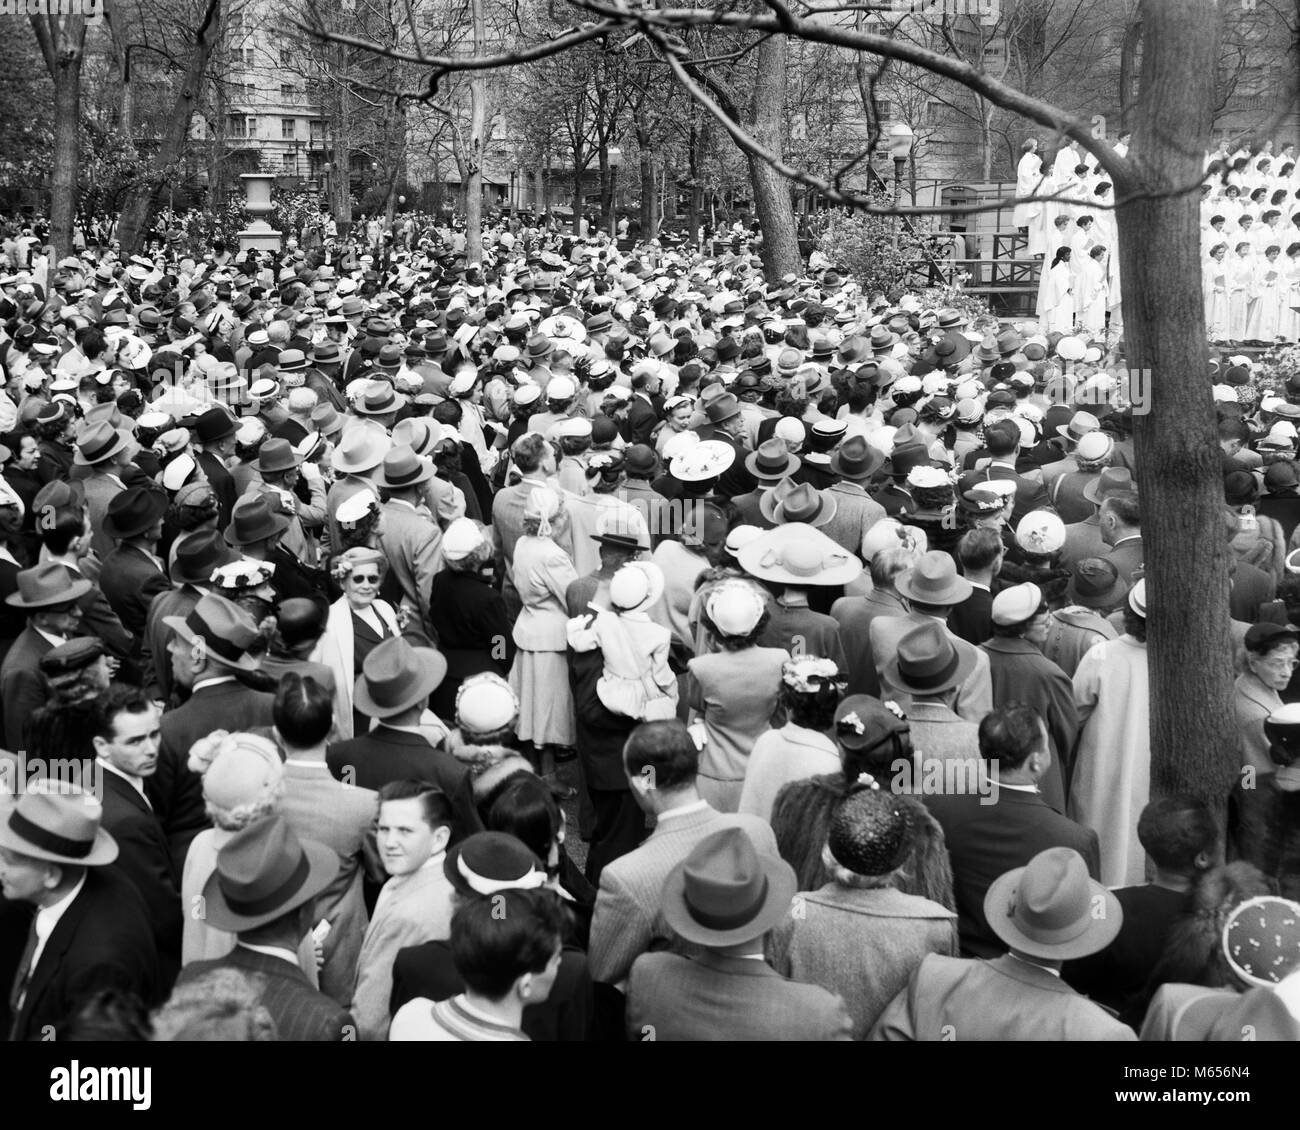 1950s EASTER SUNDAY CROWD RITTENHOUSE SQUARE PHILADELPHIA PENNSYLVANIA USA - e488 HAR001 HARS SPIRITUALITY NOSTALGIA HISTORIC HIGH ANGLE PA PARKS RITTENHOUSE REAR VIEW CONNECTION CITIES BACK VIEW JUVENILES MALES SPRINGTIME B&W BLACK AND WHITE CAUCASIAN ETHNICITY EASTER PARADE EASTER SUNDAY OLD FASHIONED PERSONS Stock Photo